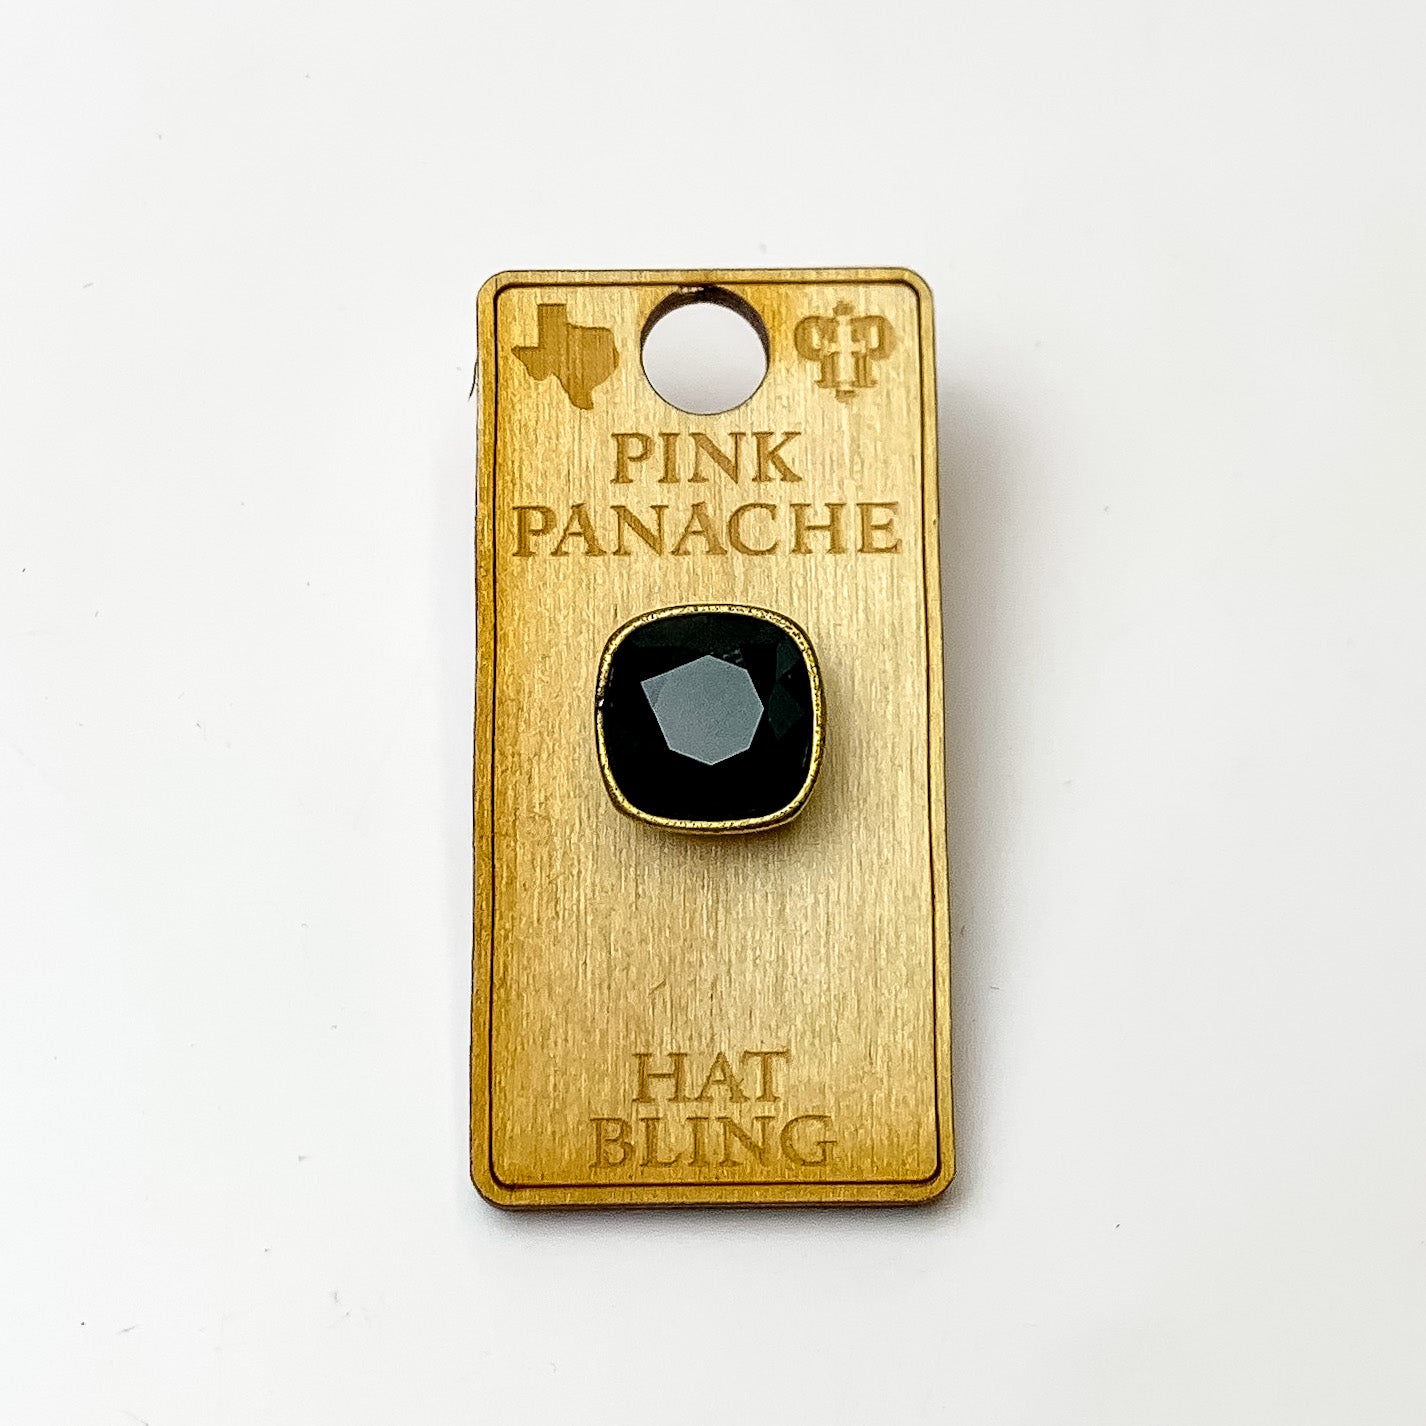 Bronze, square hat pin with a black cushion cut crystal. This hat pin is pictured on a wooden Pink Panache holder on a white background.